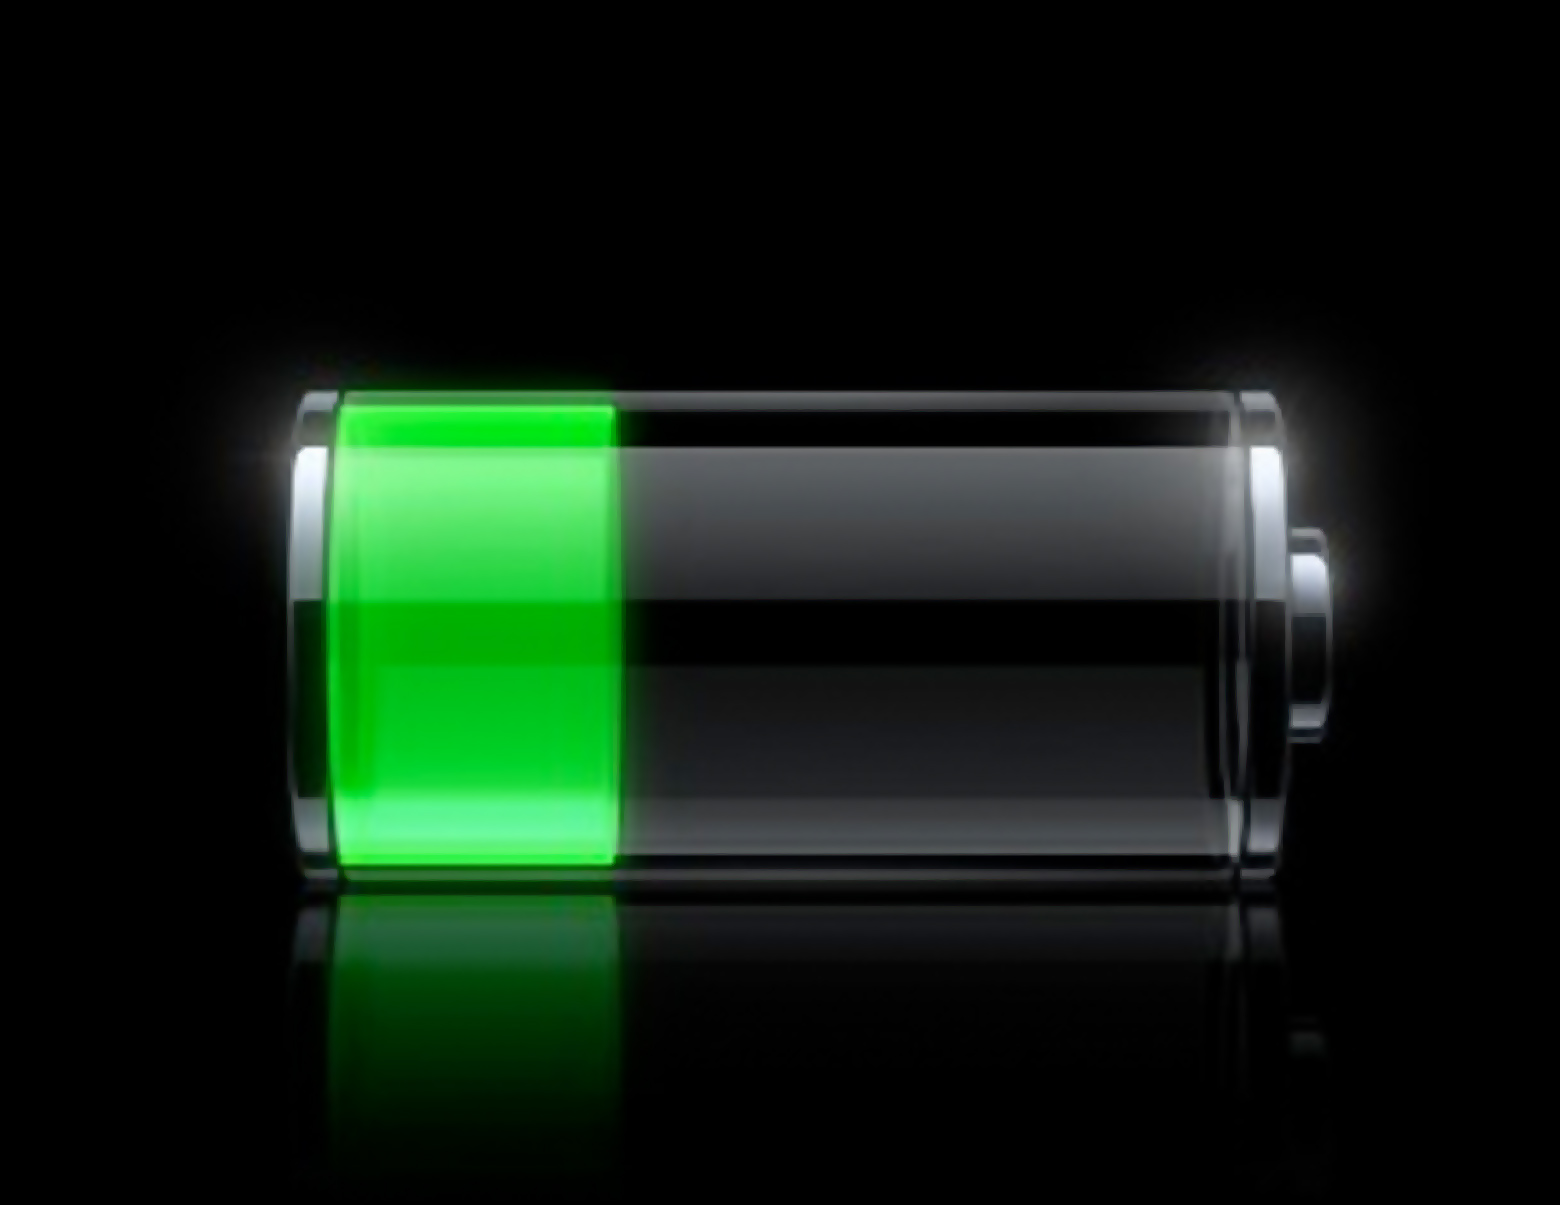 Here’s an awesome new battery technology that will never make it into